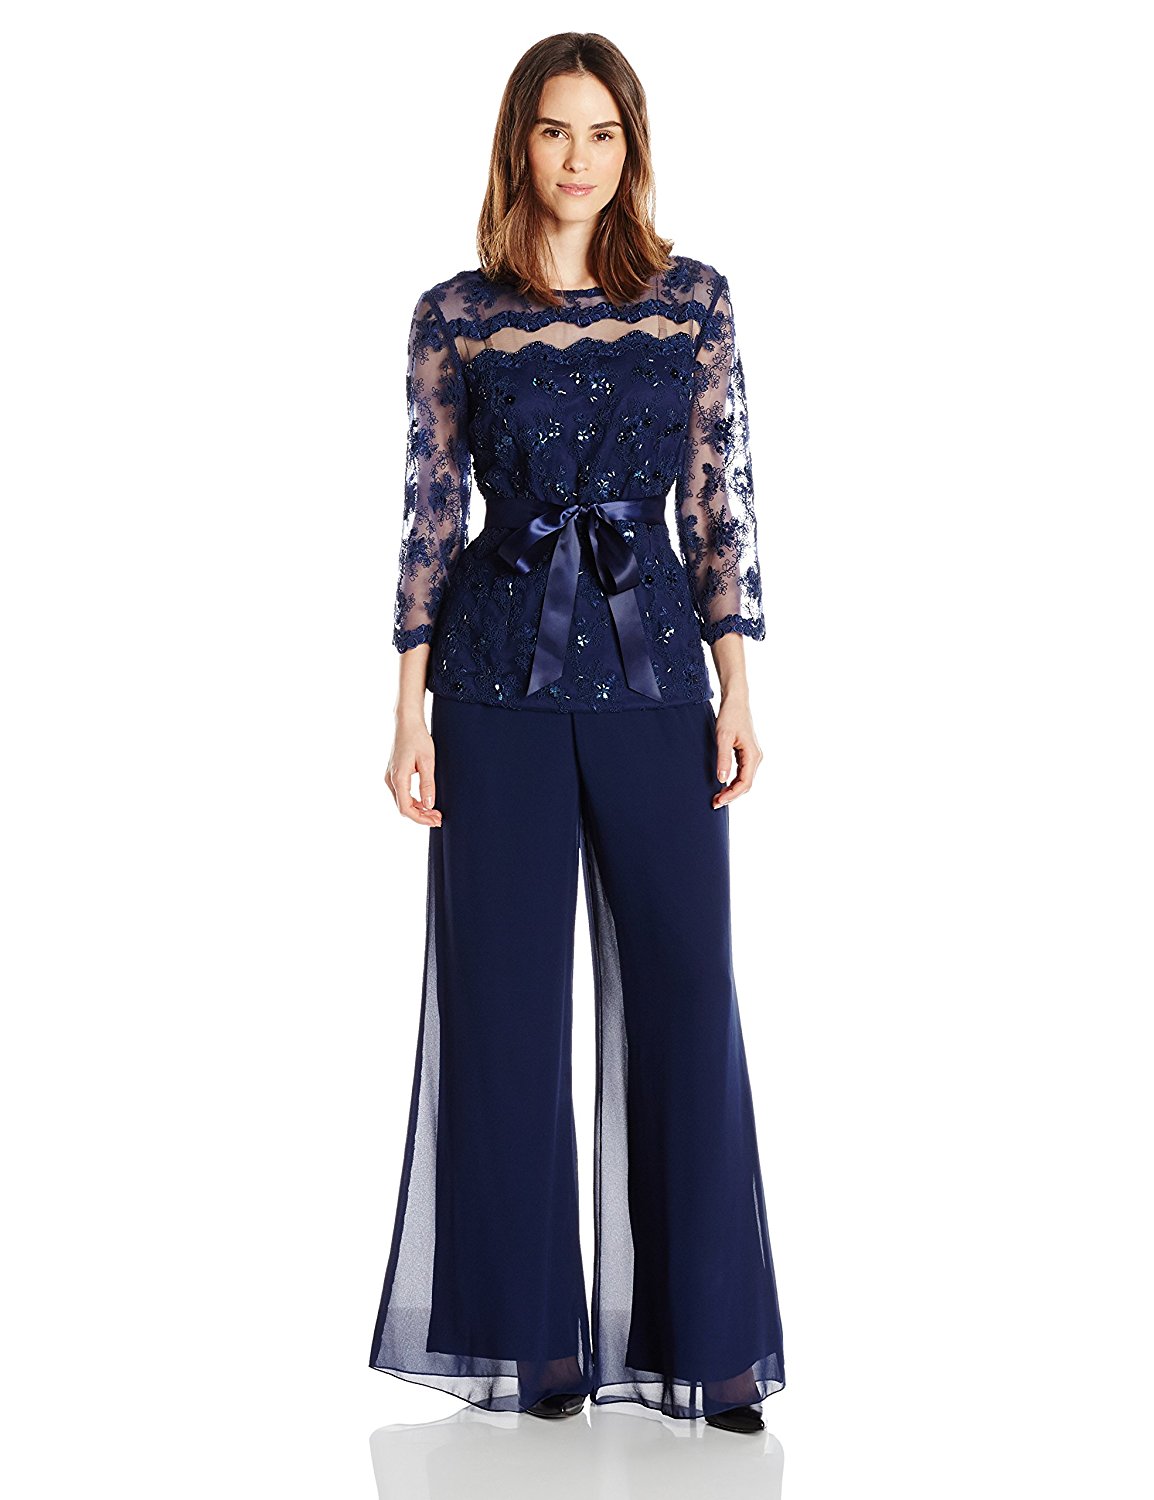 modern mother of the bride pant suits